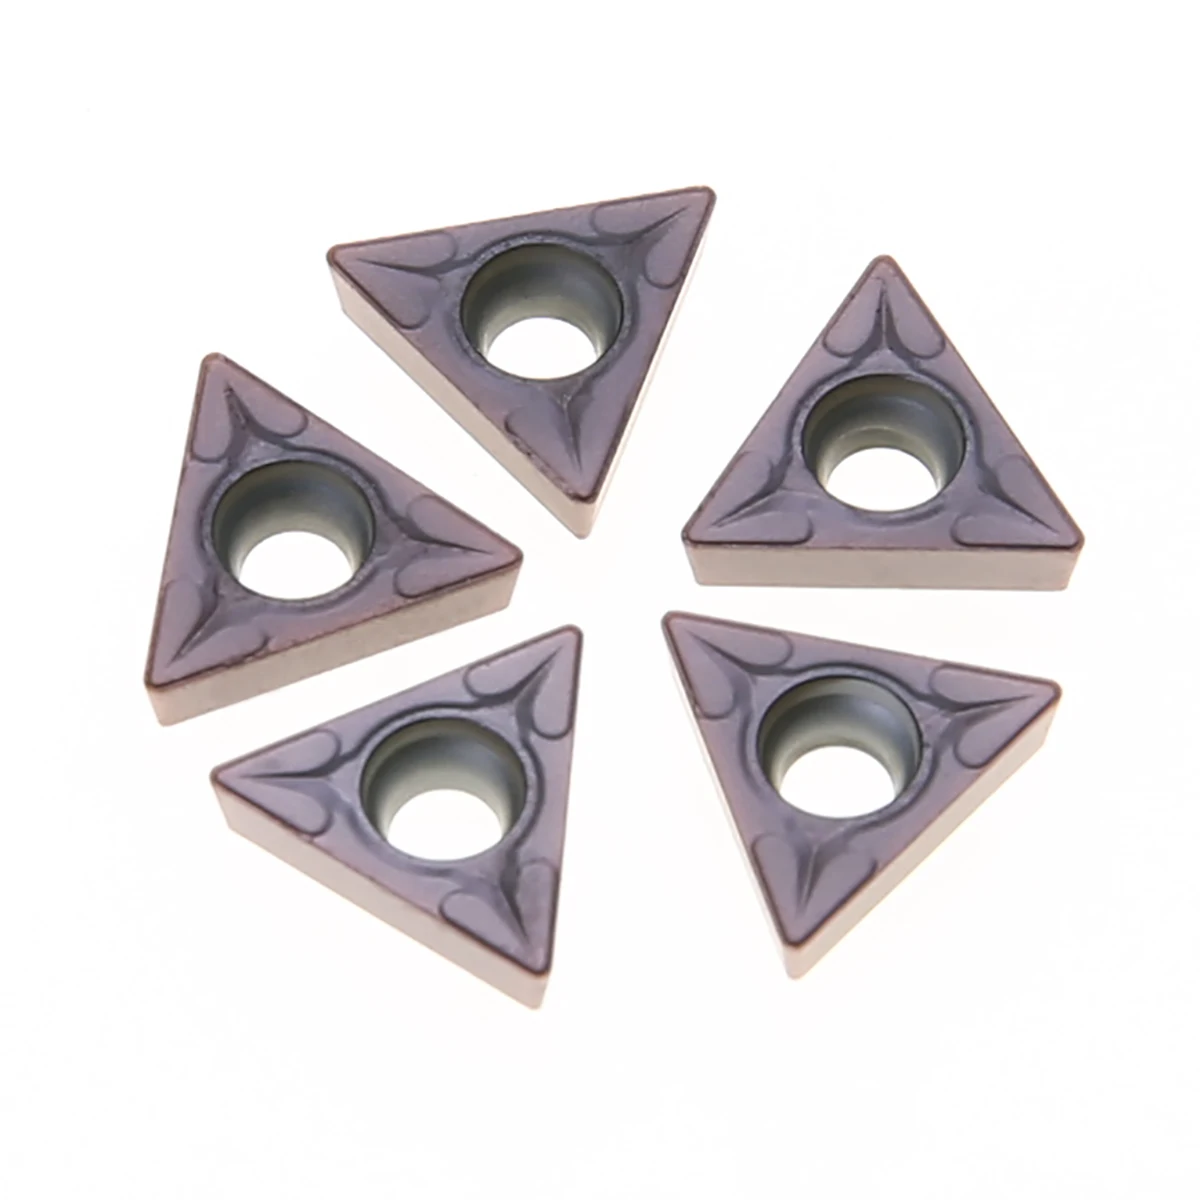 10pcs/Box Durable Carbide Inserts TCMT110204/TCMT 731 Blades CNC Lathe Turning Cutter for Boring Tool 10mm*10mm*2mm